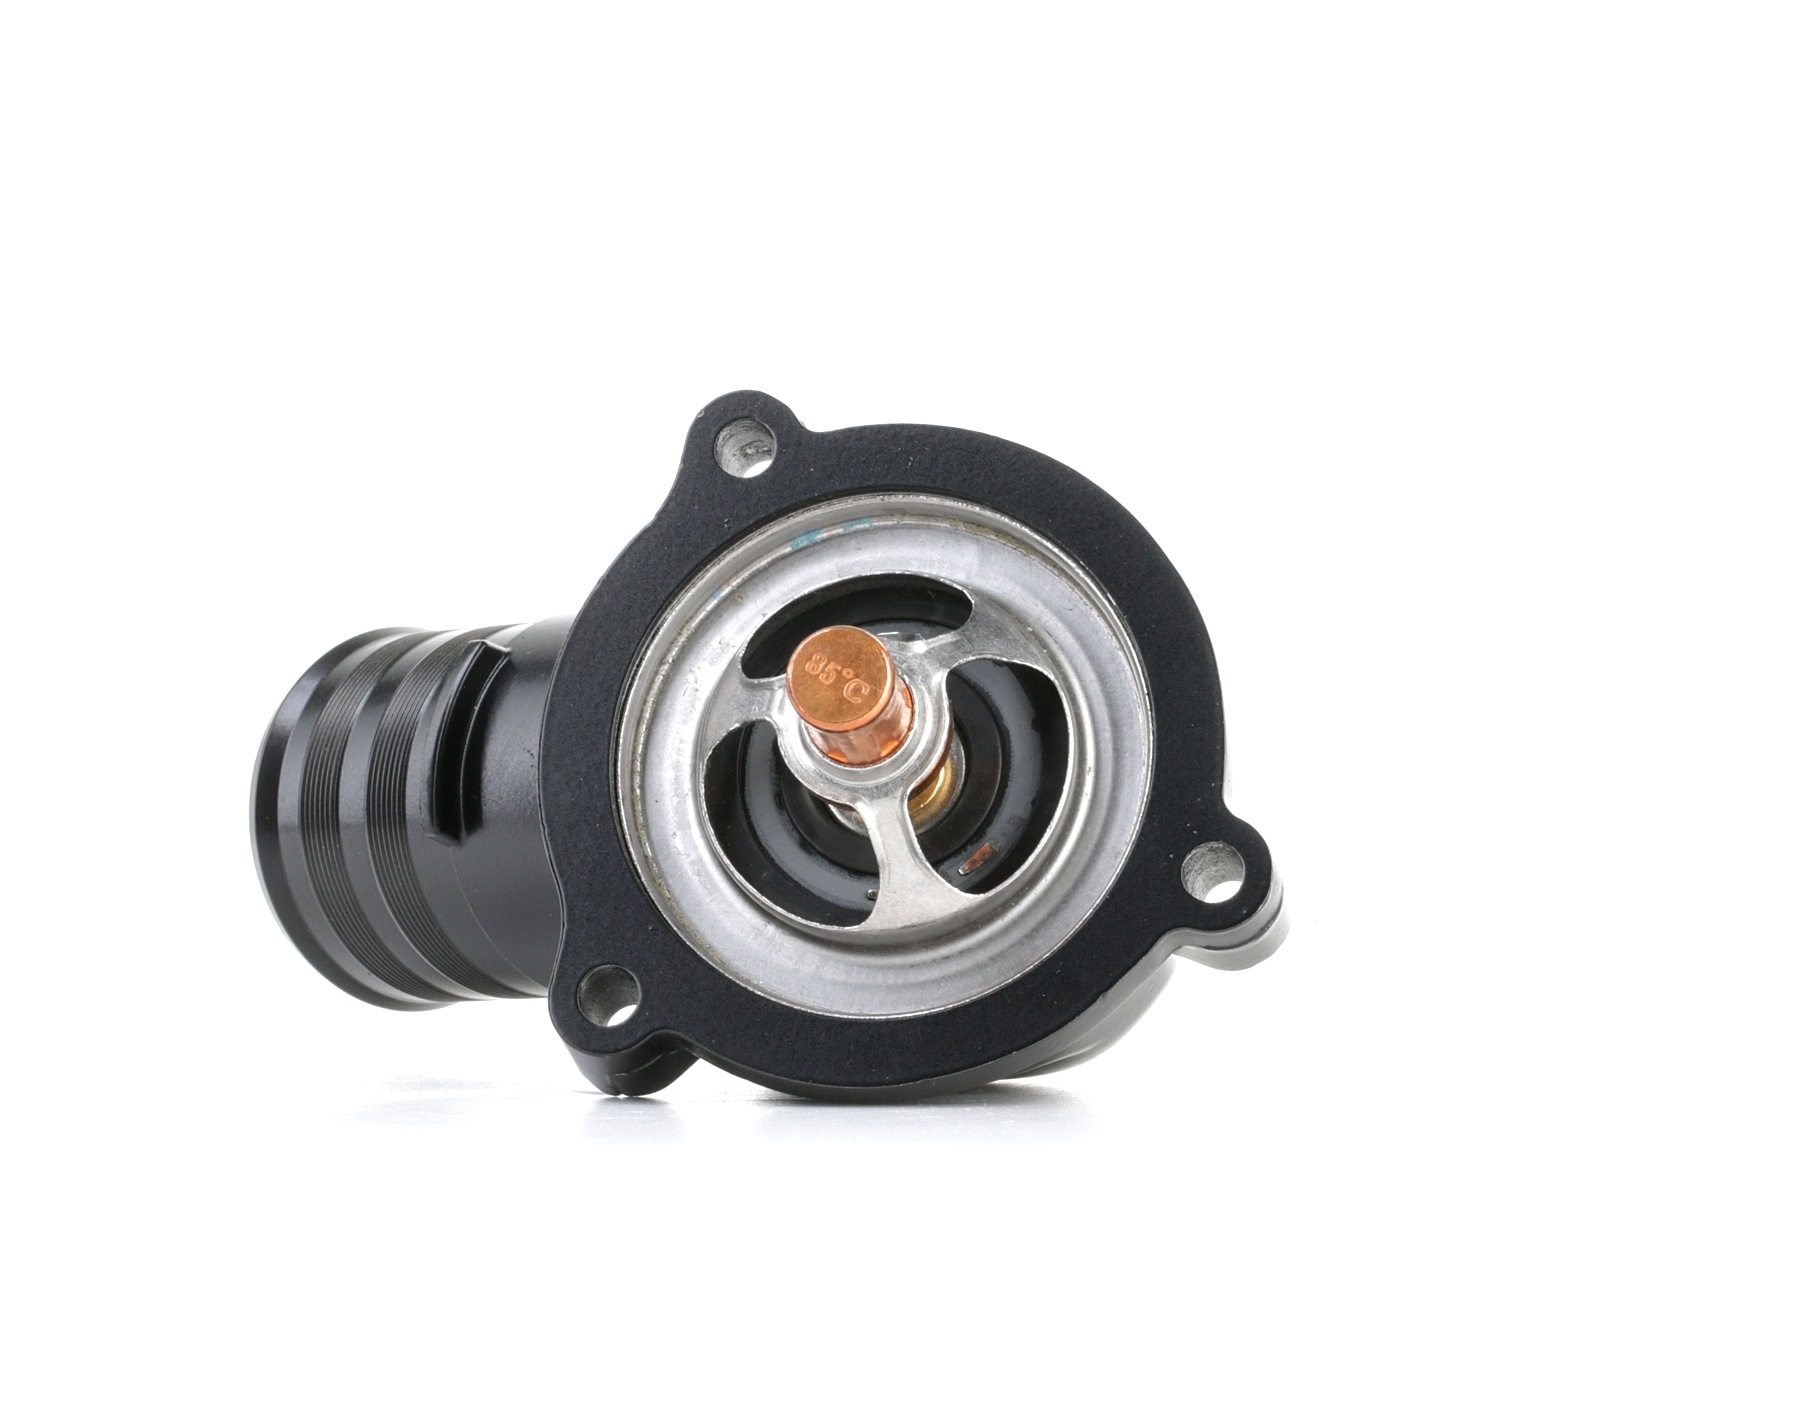 STARK SKTC-0560182 Engine thermostat Opening Temperature: 85°C, with housing, Synthetic Material Housing